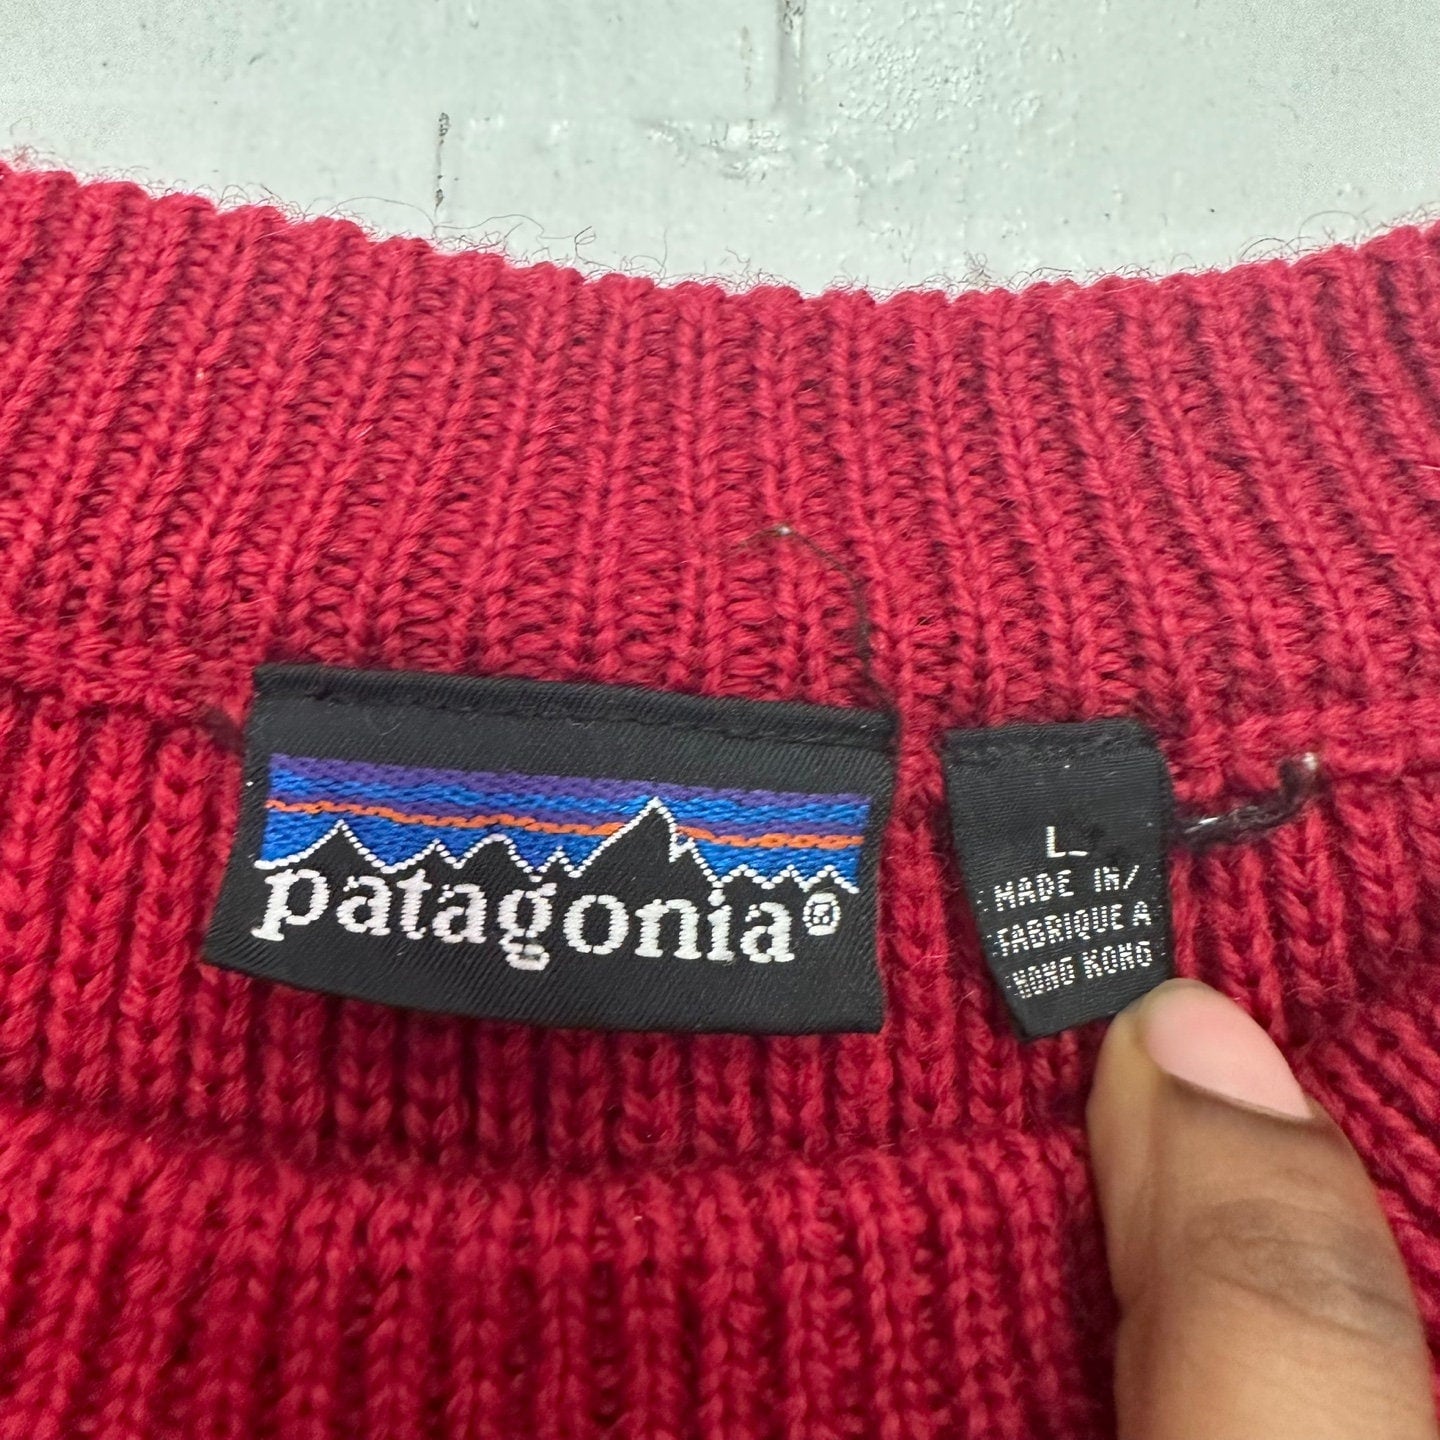 Vintage Patagonia Red Cable Knit Oversized Sweater | Vintage Knit Sweater | Patagonia Knitwear | Vintage Knitwear | Size L | SKU-2065 |